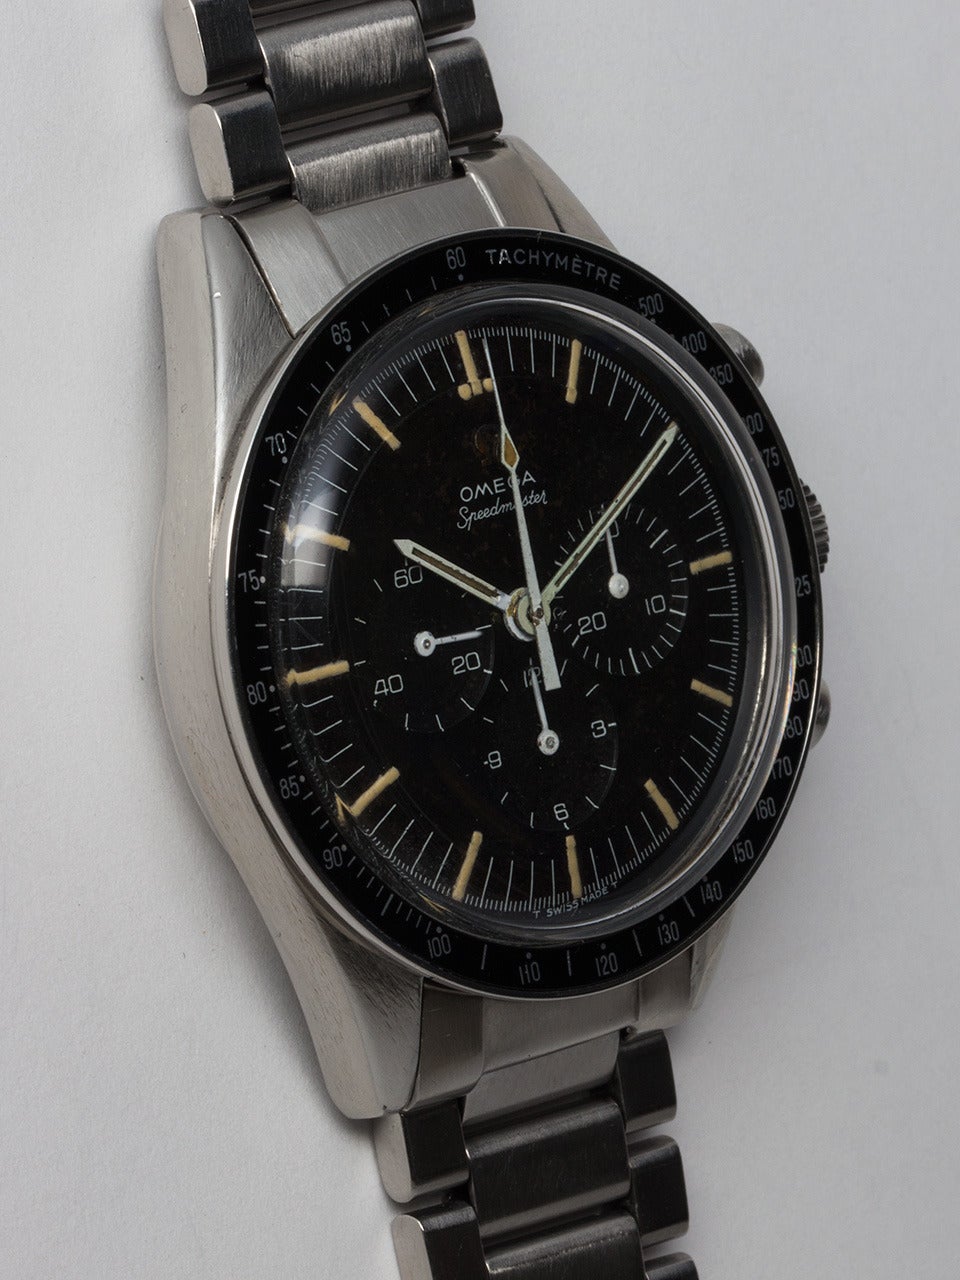 Omega Stainless Steel Non Professional Pre Moon Speedmaster Wristwatch. Ref 105.003-41 serial# 22 million circa 1964. 42mm diameter case with tachometer bezel and black original stepped dial and patina'd hands. Powered by Valjoux 72 3 registers